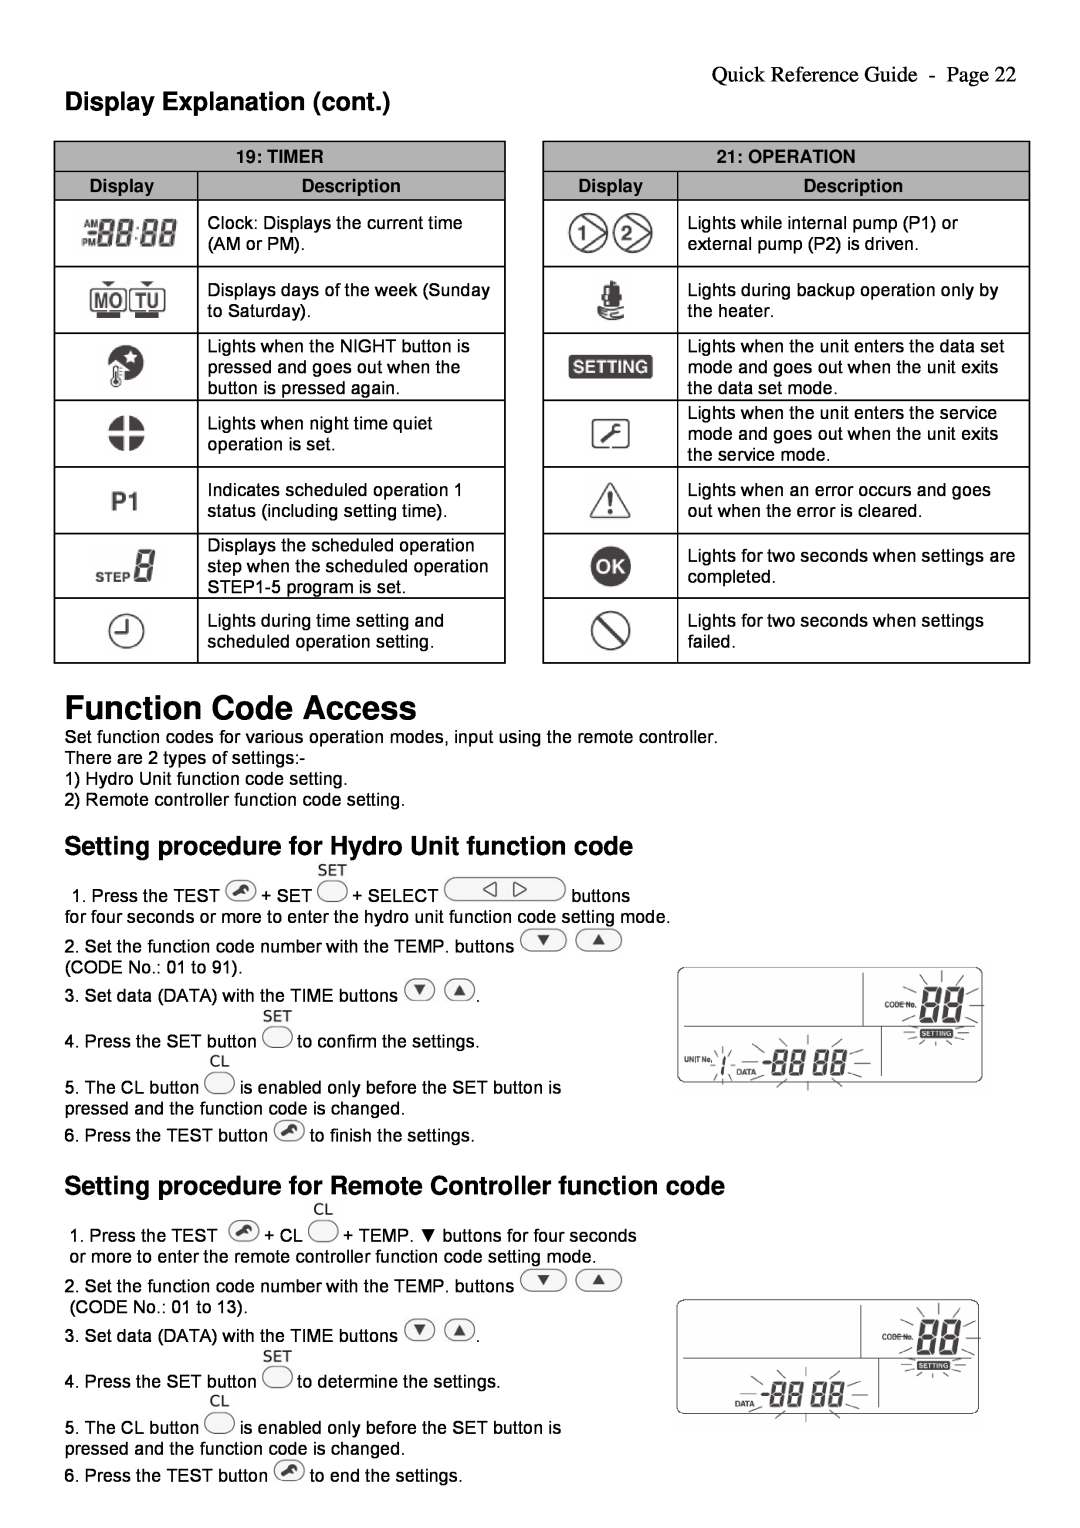 Toshiba A09-01P manual Function Code Access, Display Explanation cont, Setting procedure for Hydro Unit function code 